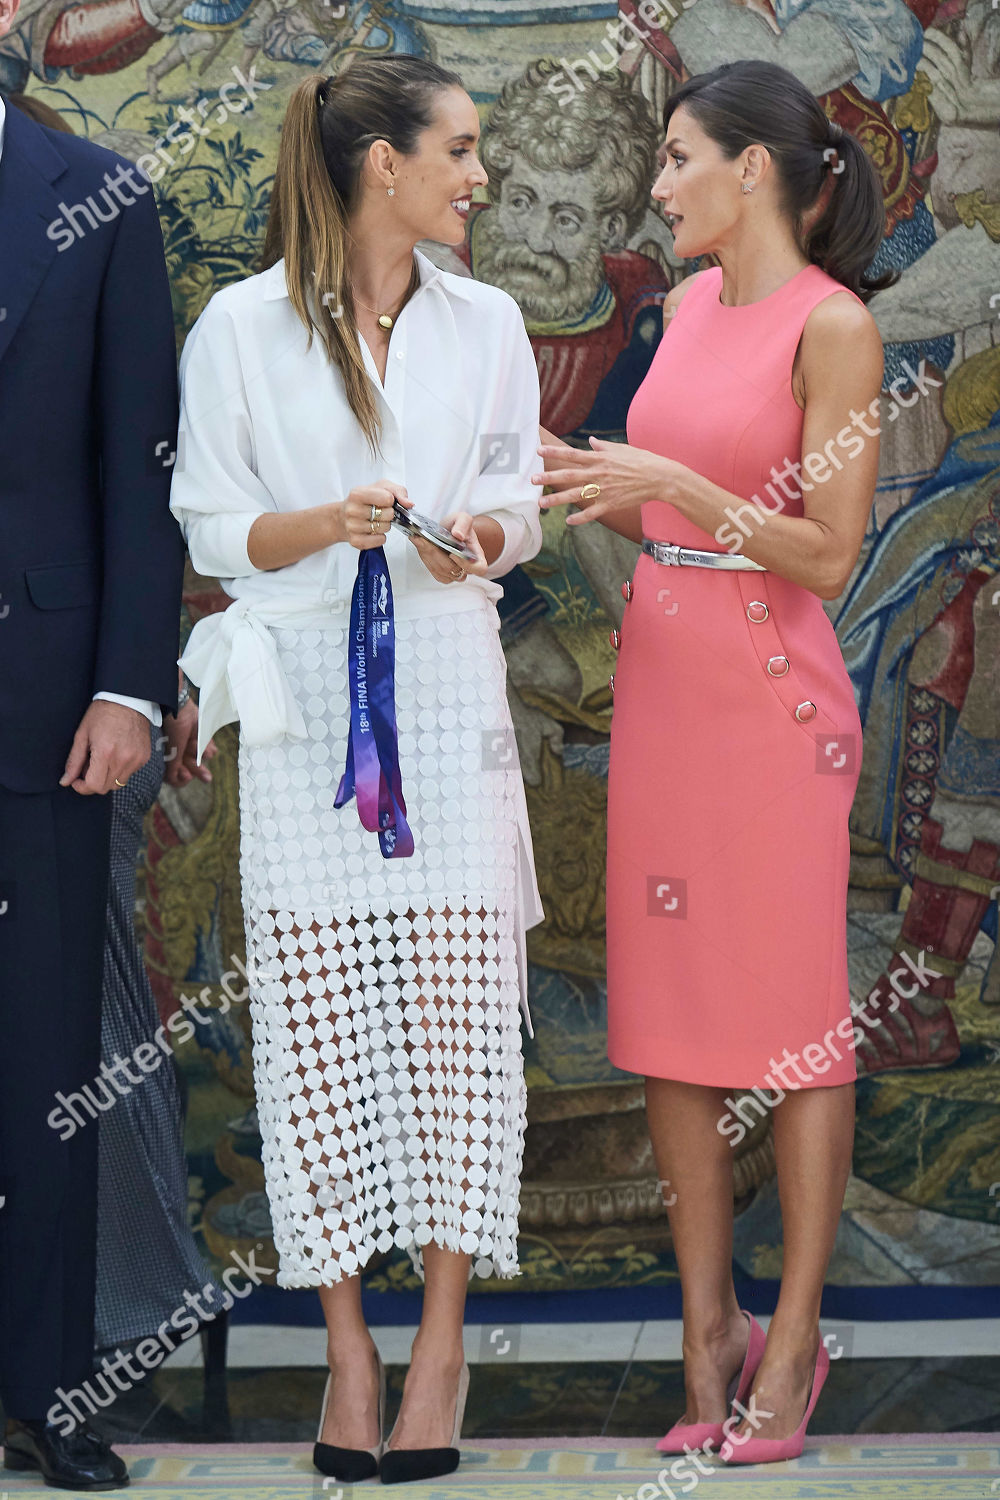 spanish-royals-audience-with-swimmer-ona-carbonell-ballestero-at-zarzuela-palace-madrid-spain-shutterstock-editorial-10344094r.jpg